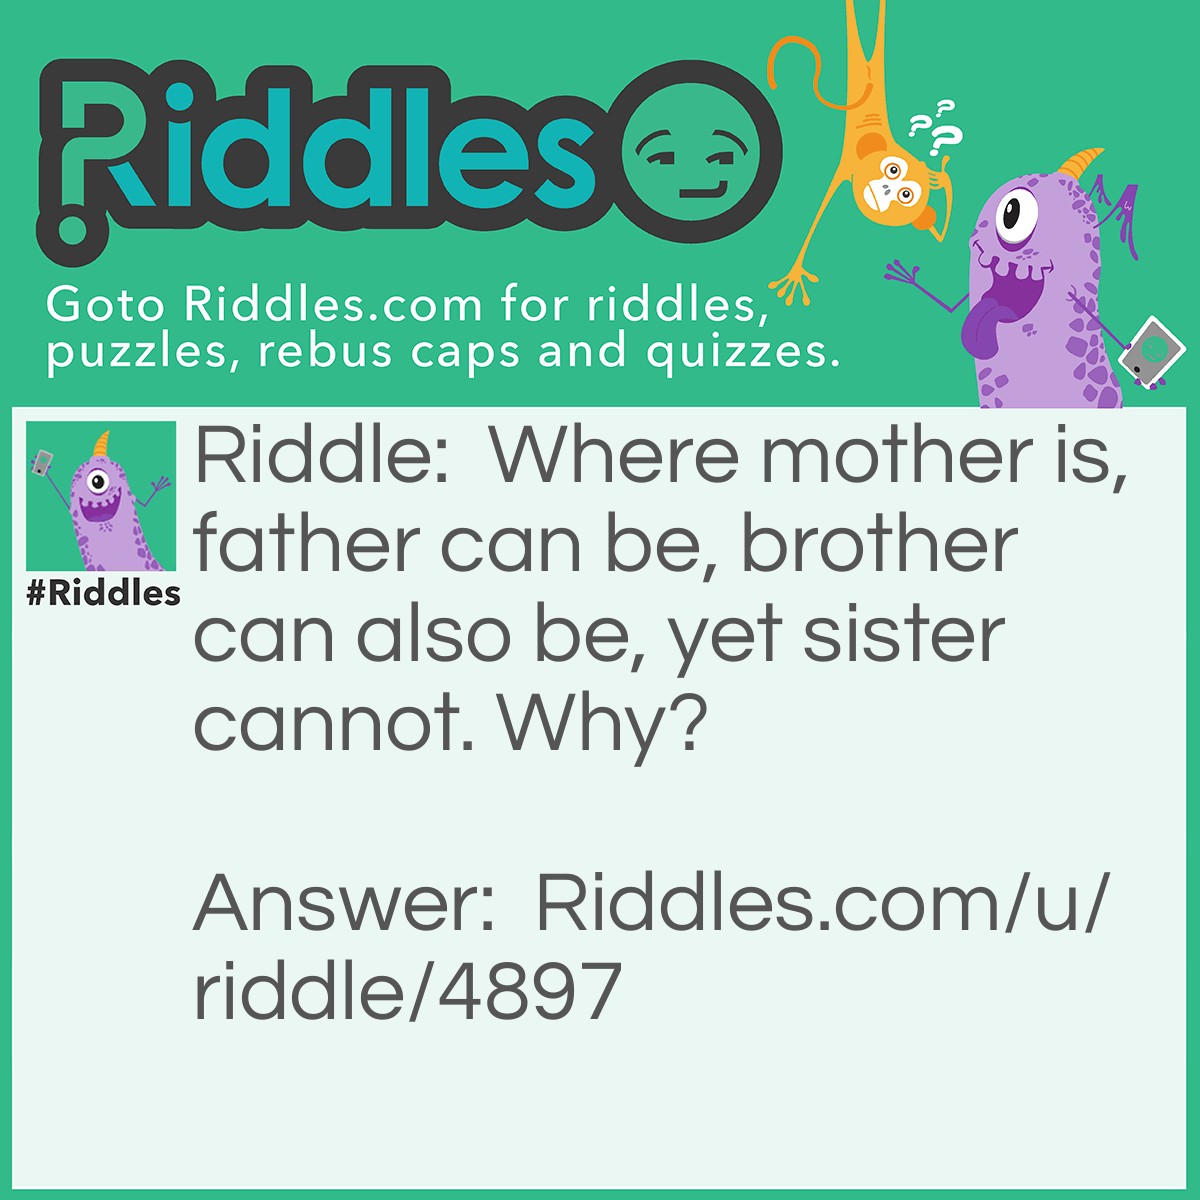 Riddle: Where mother is, father can be, brother can also be, yet sister cannot. Why? Answer: Because of the 'th'.